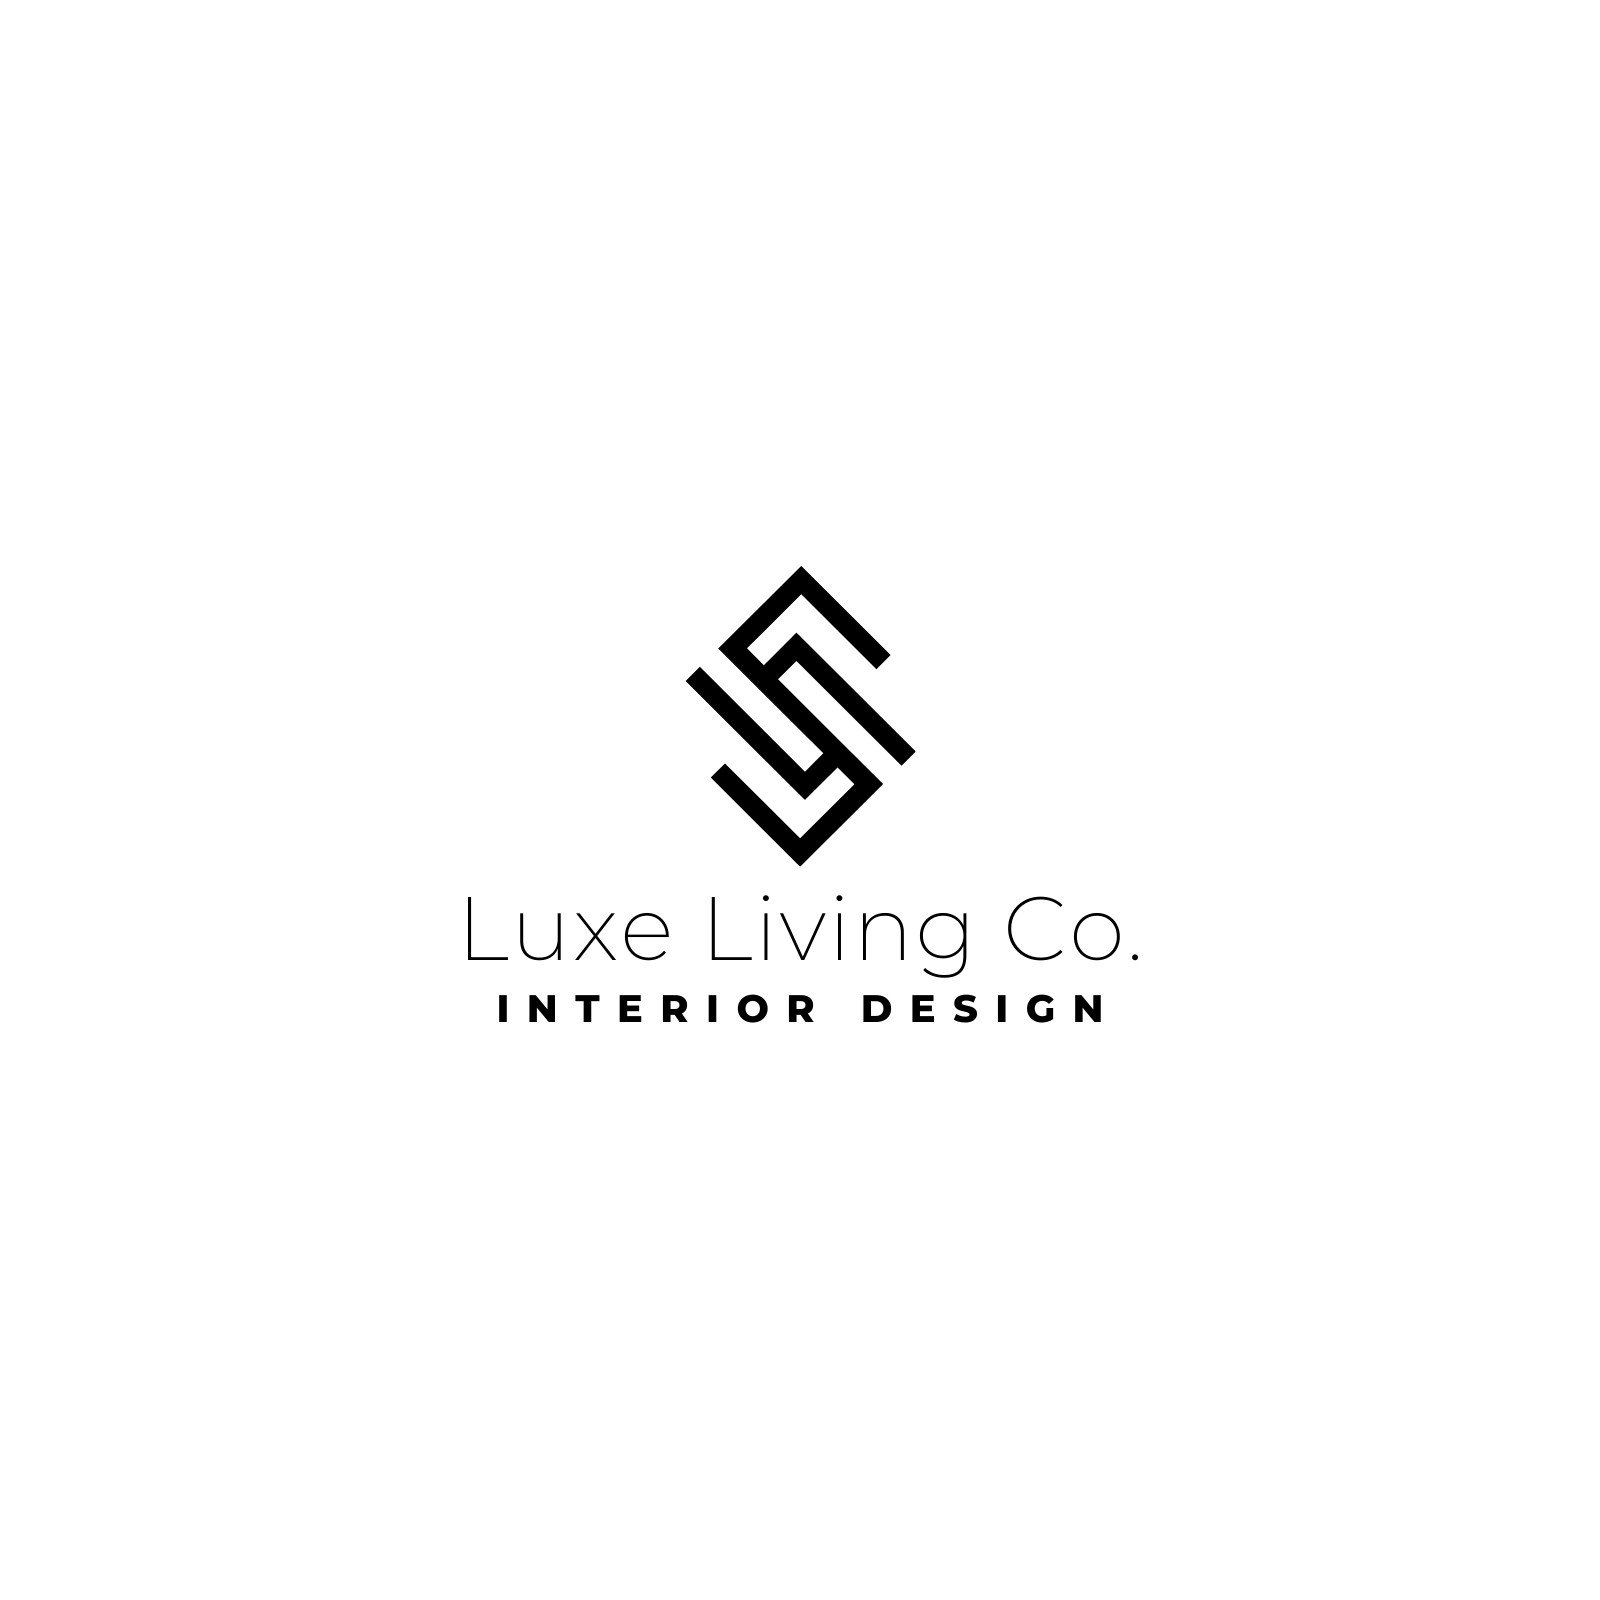 Minimalist Logo Design Services for Business and Companies (From $15) |  Upwork